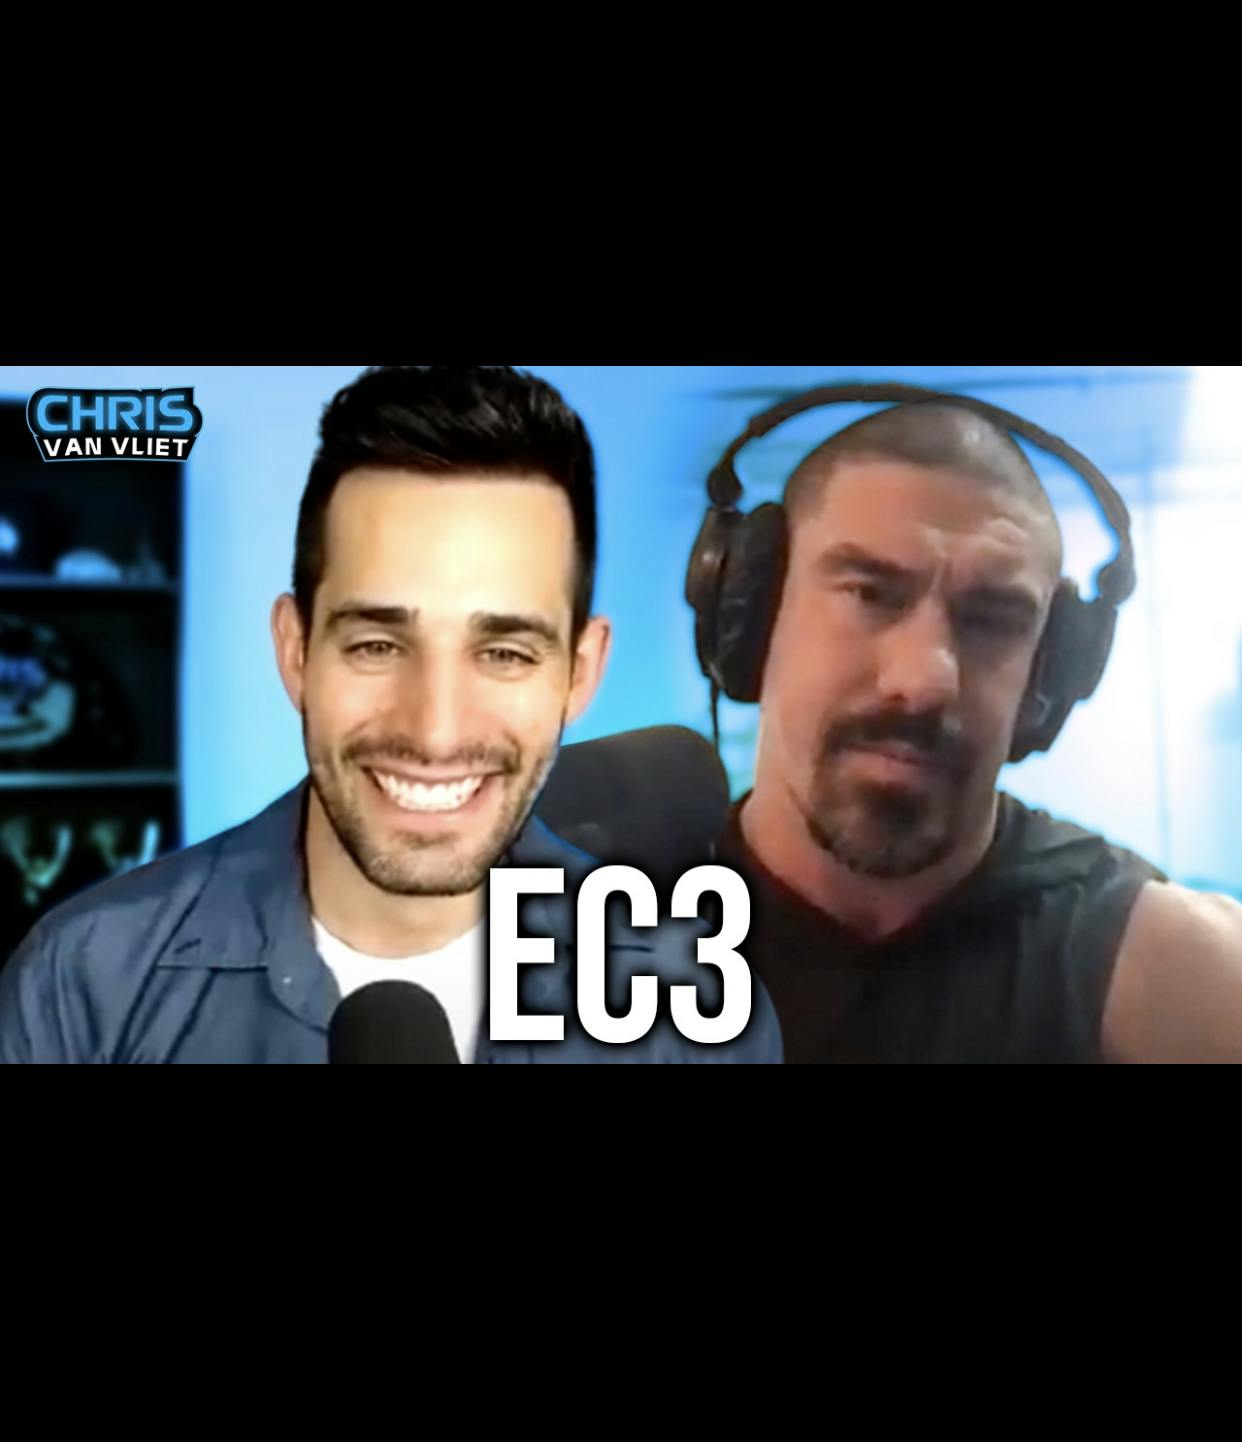 EC3 on The Importance of Mental Health, Braun Strowman and How To Free The Narrative